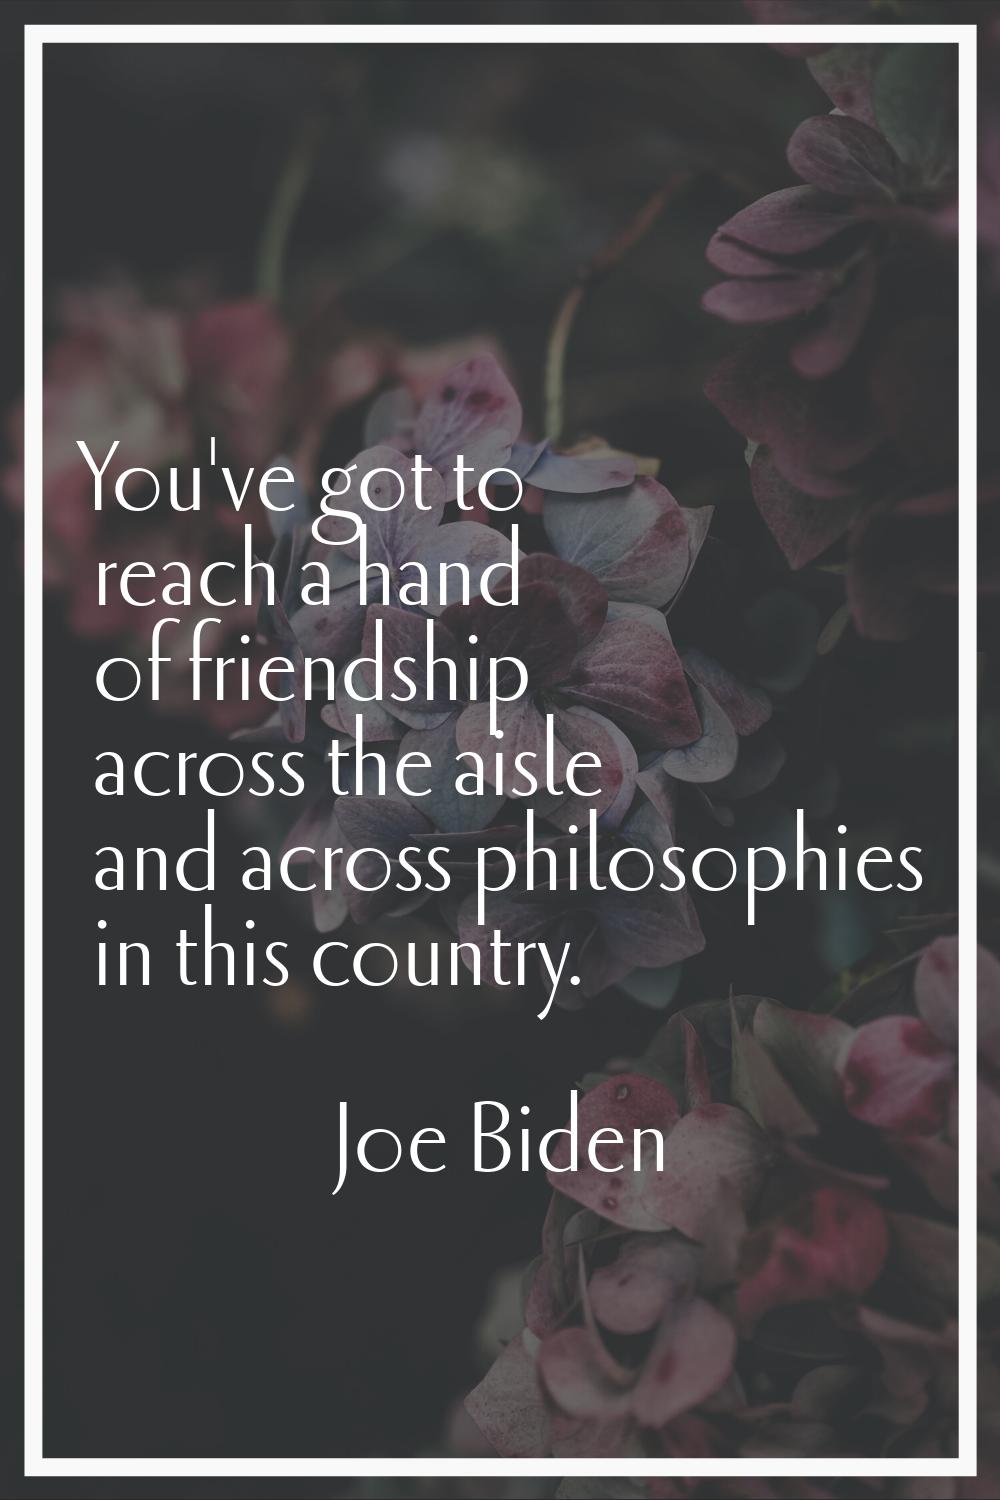 You've got to reach a hand of friendship across the aisle and across philosophies in this country.